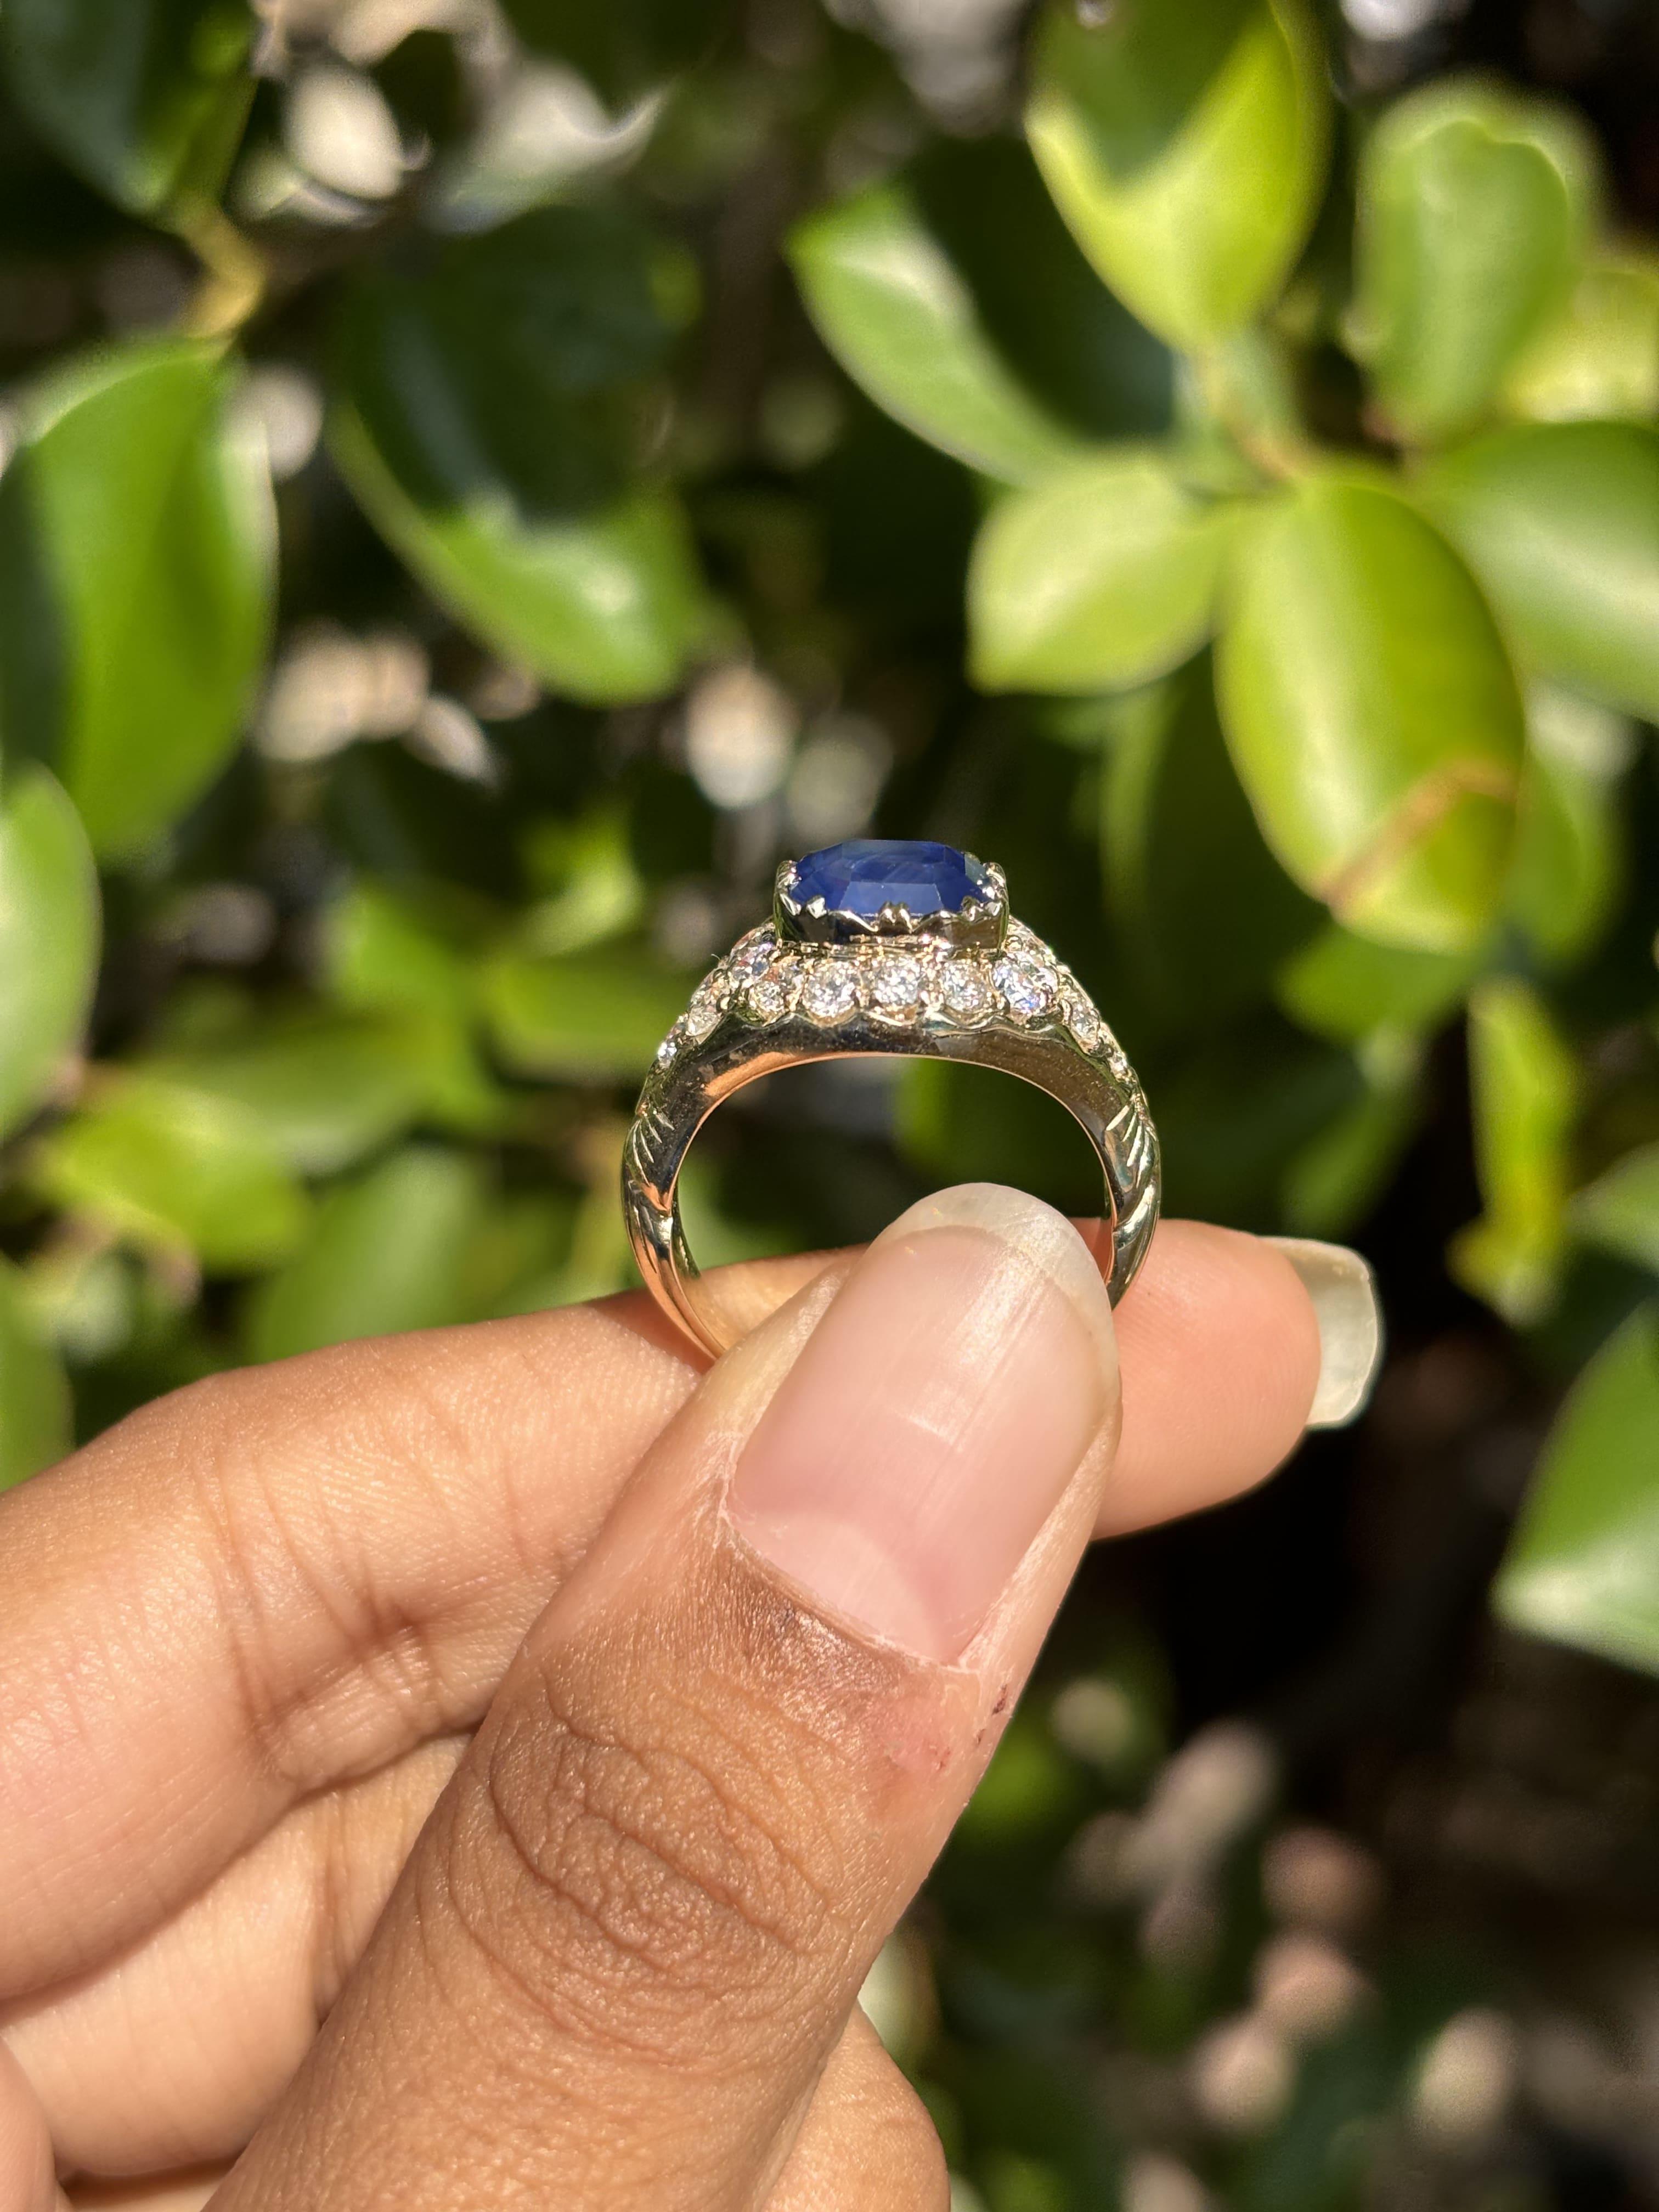   2.64 Carat Royal Blue Sapphire Ring with Old Mine Cut Diamonds in 18K Gold 3